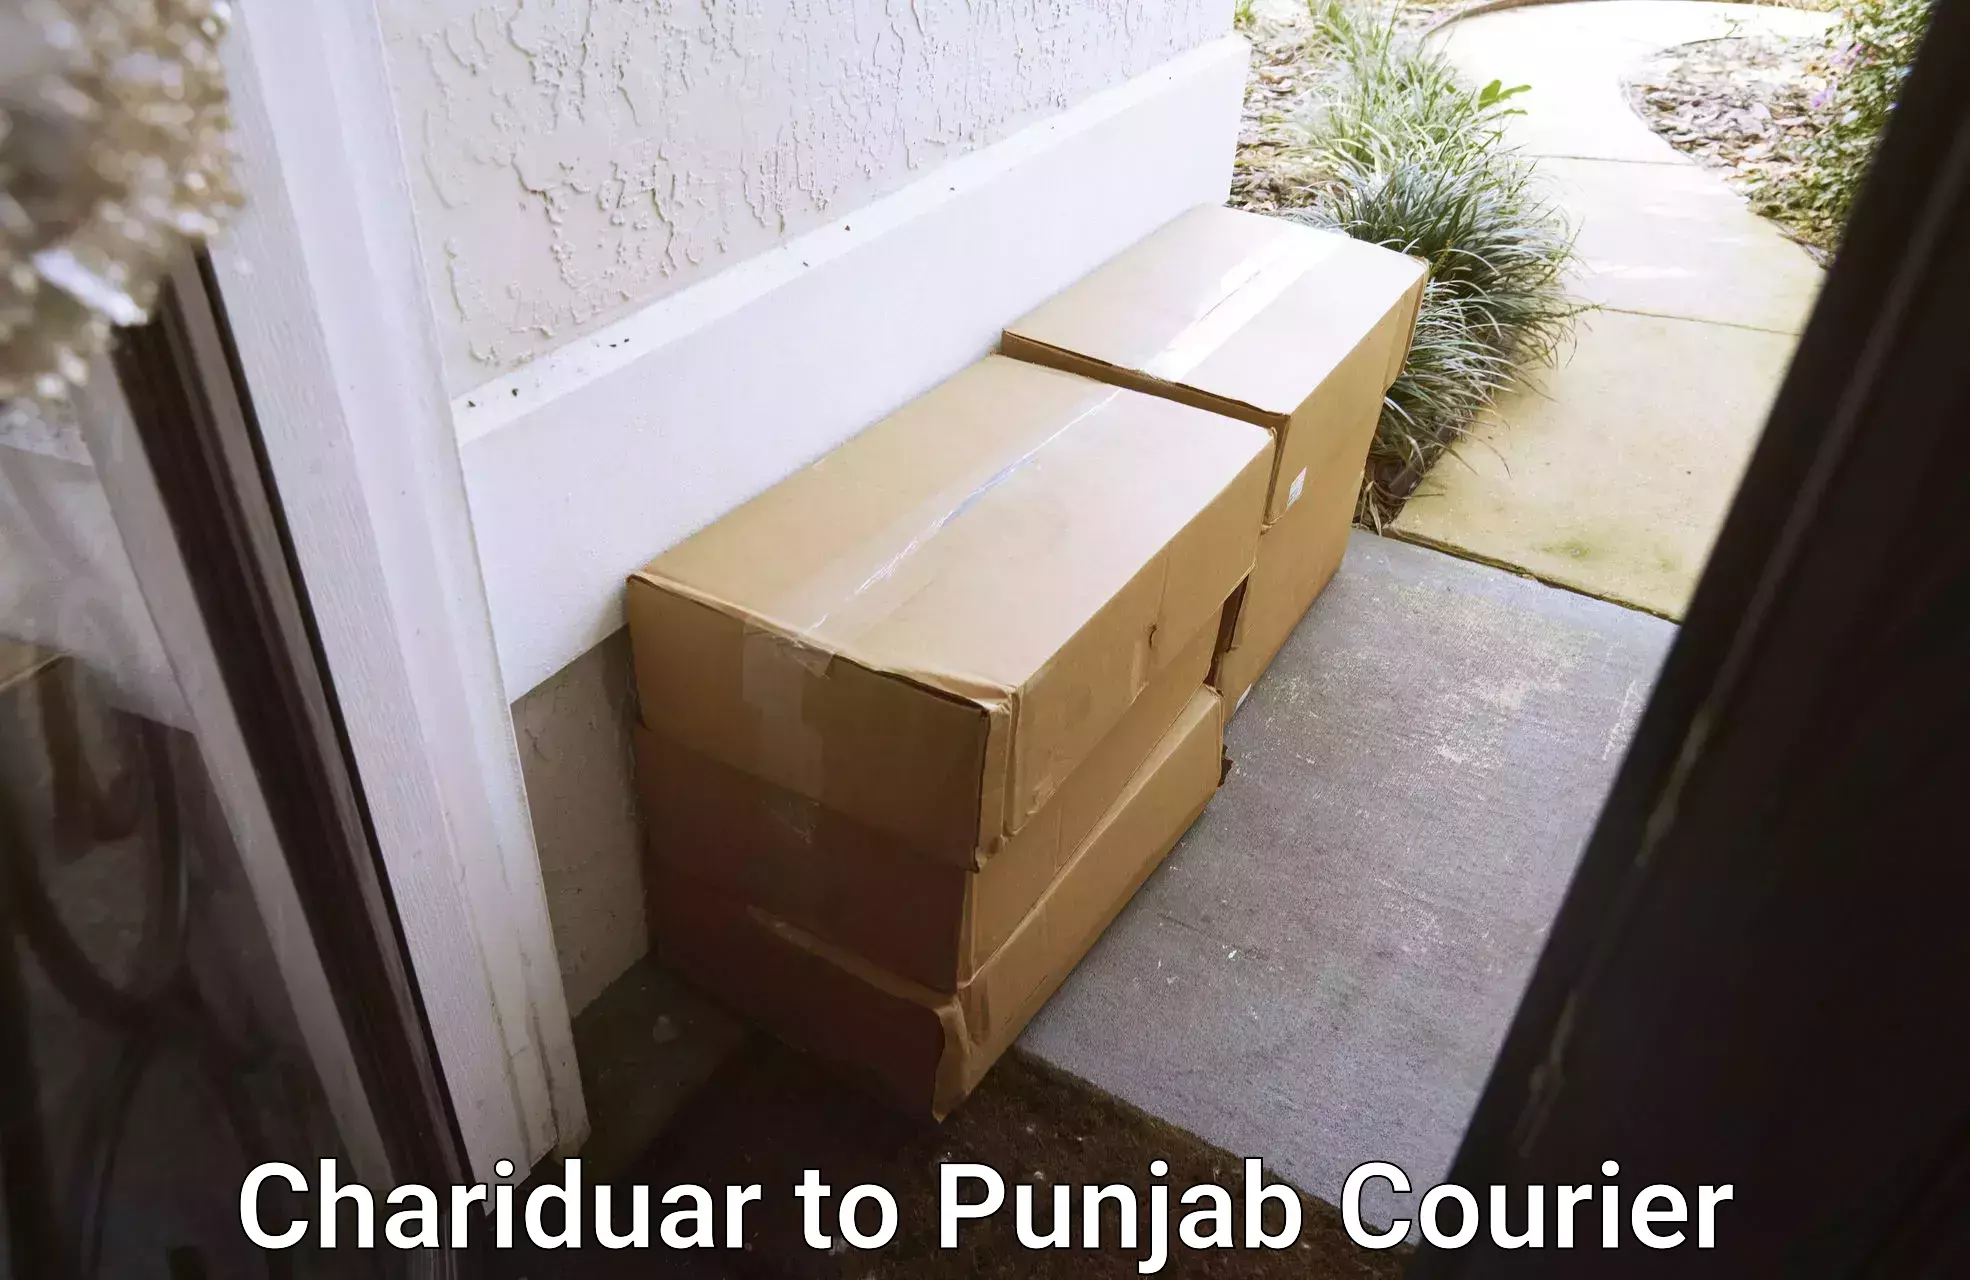 Cost-effective courier options Chariduar to Fatehgarh Sahib